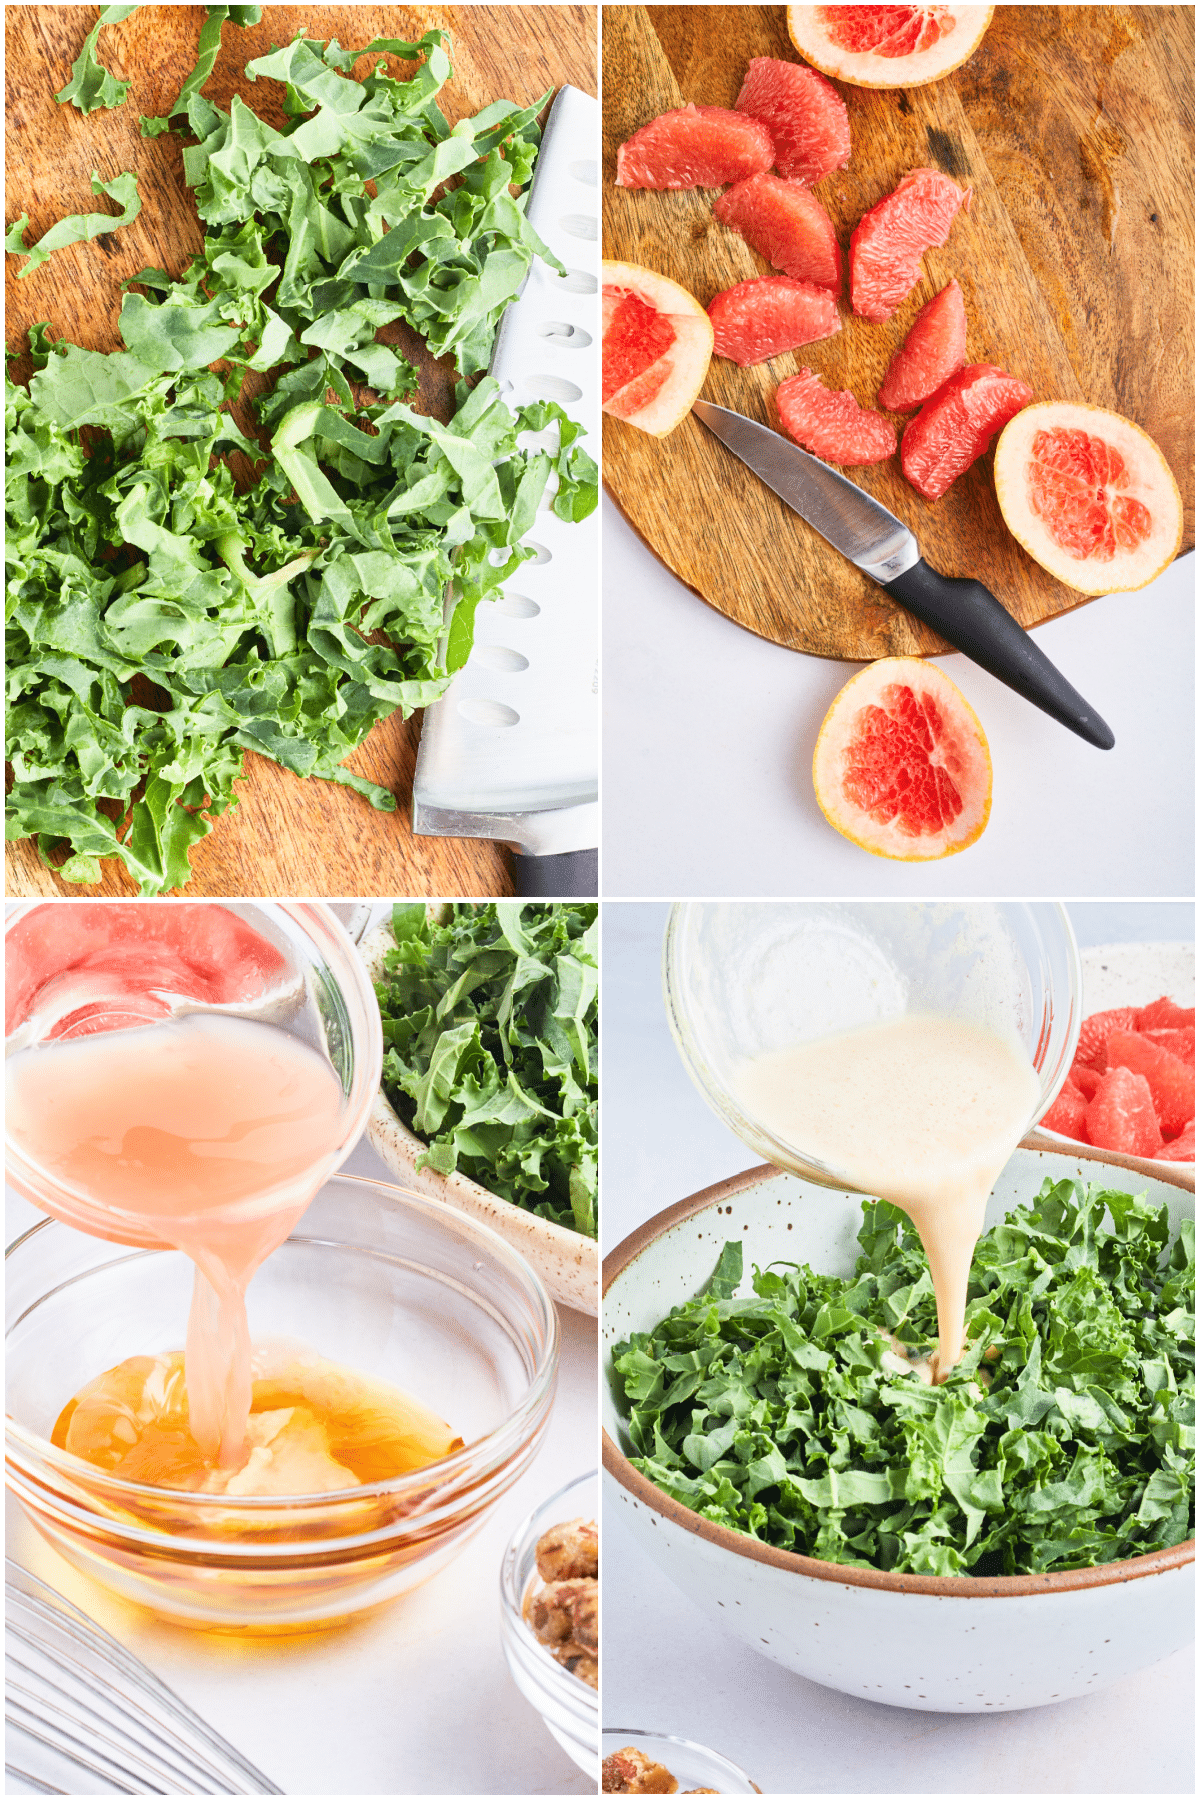 A four image collage showing how to make grapefruit kale salad: chiffonade the kale (chiffonade is to roll and slice the kale into thin strips), cut the grapefruit into segments, make the dressing, pour the dressing over the kale.